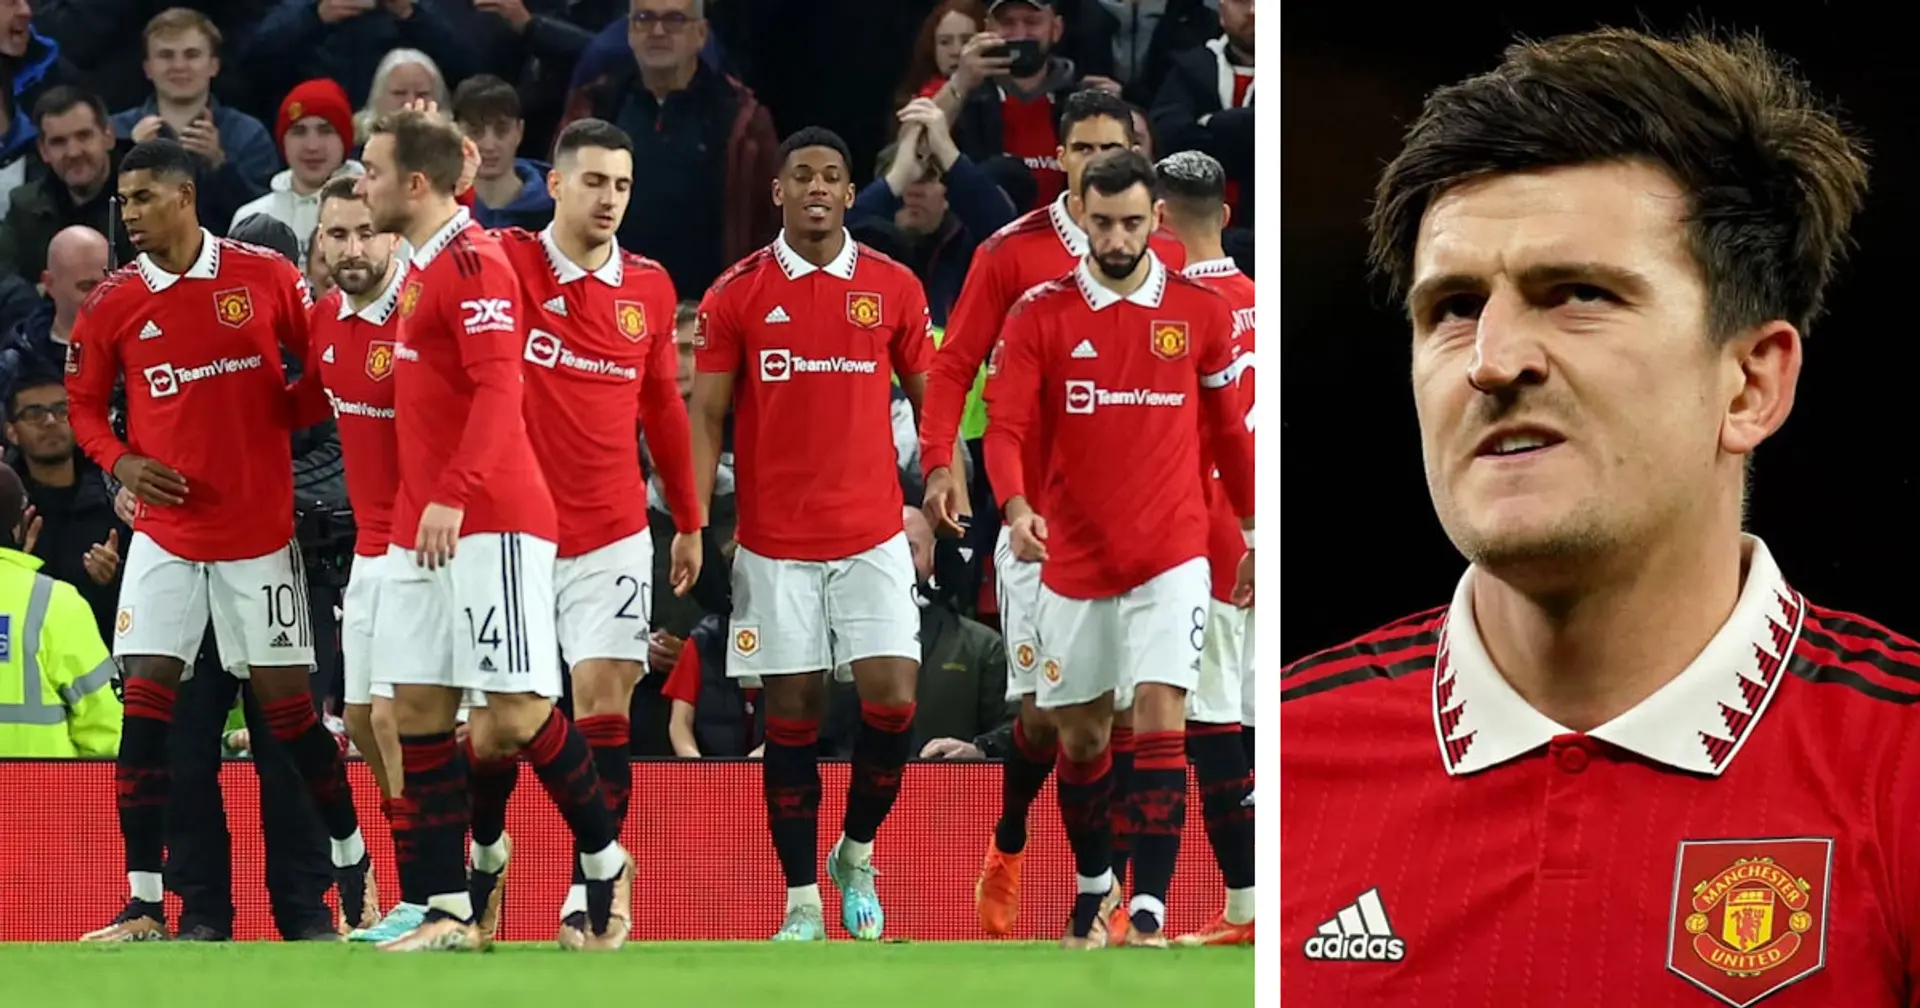 Maguire told his 'time is up' at Man United due to one defender - not Martinez